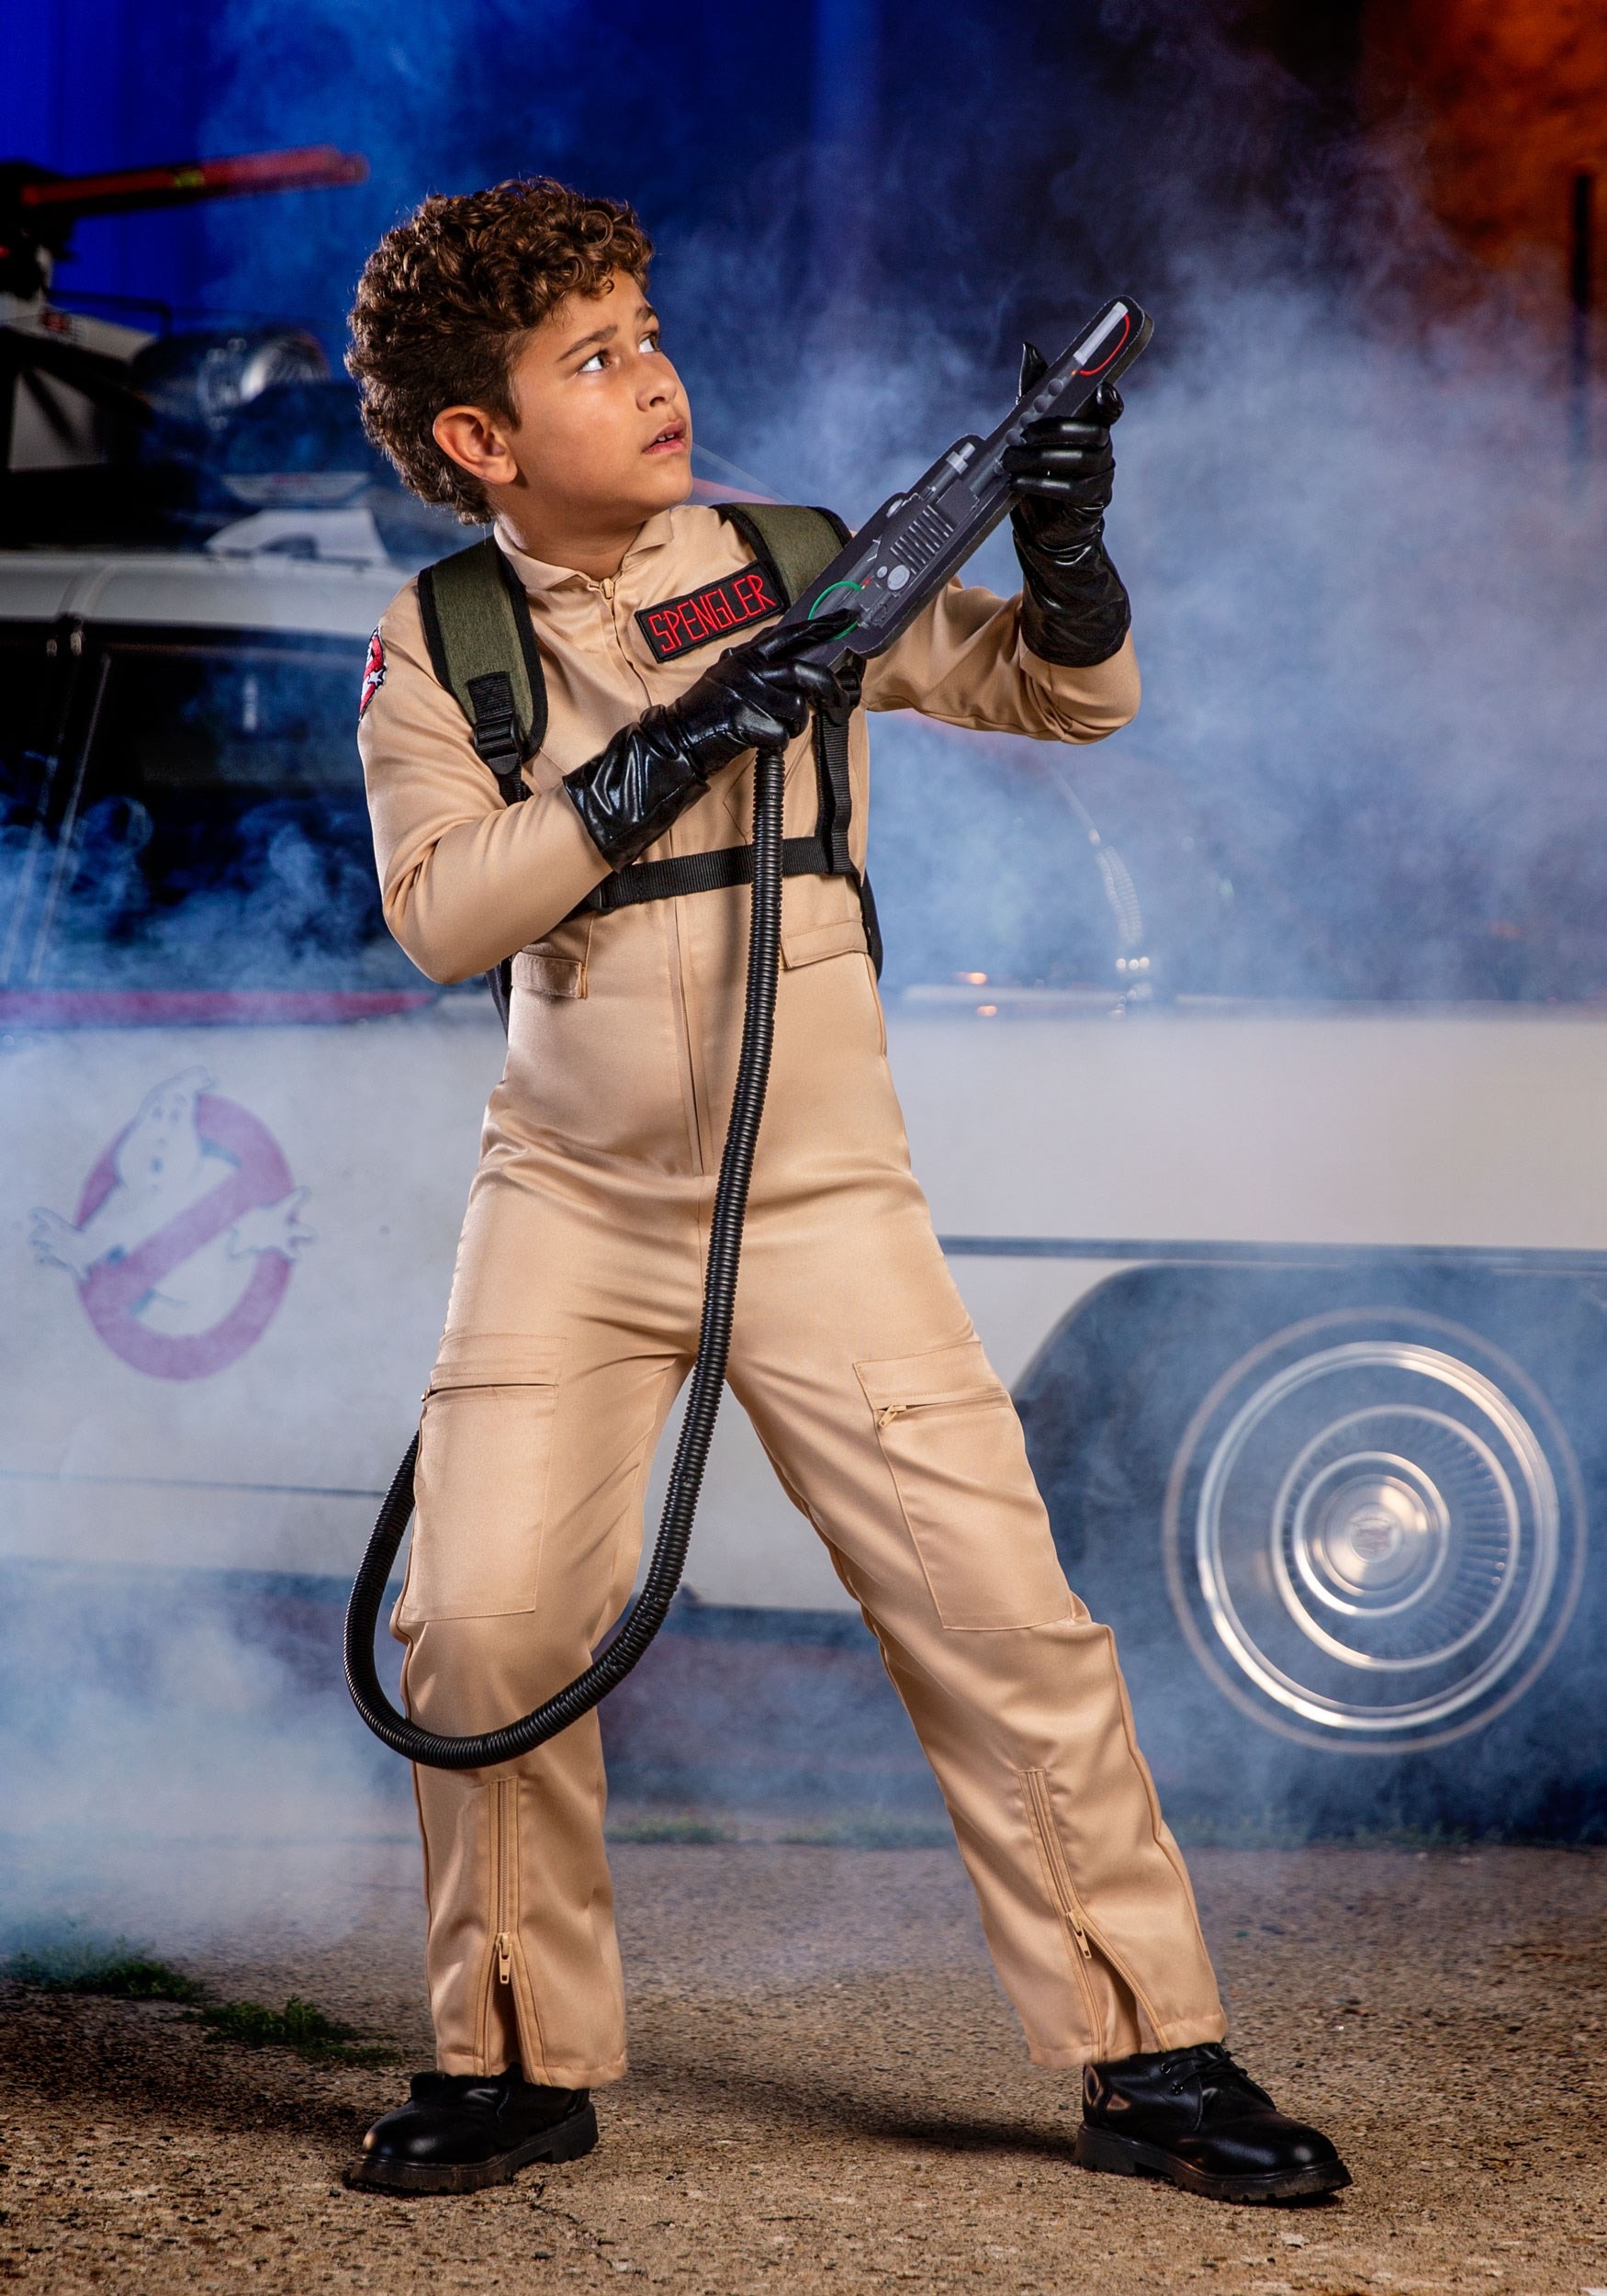 ghost buster costumes kids